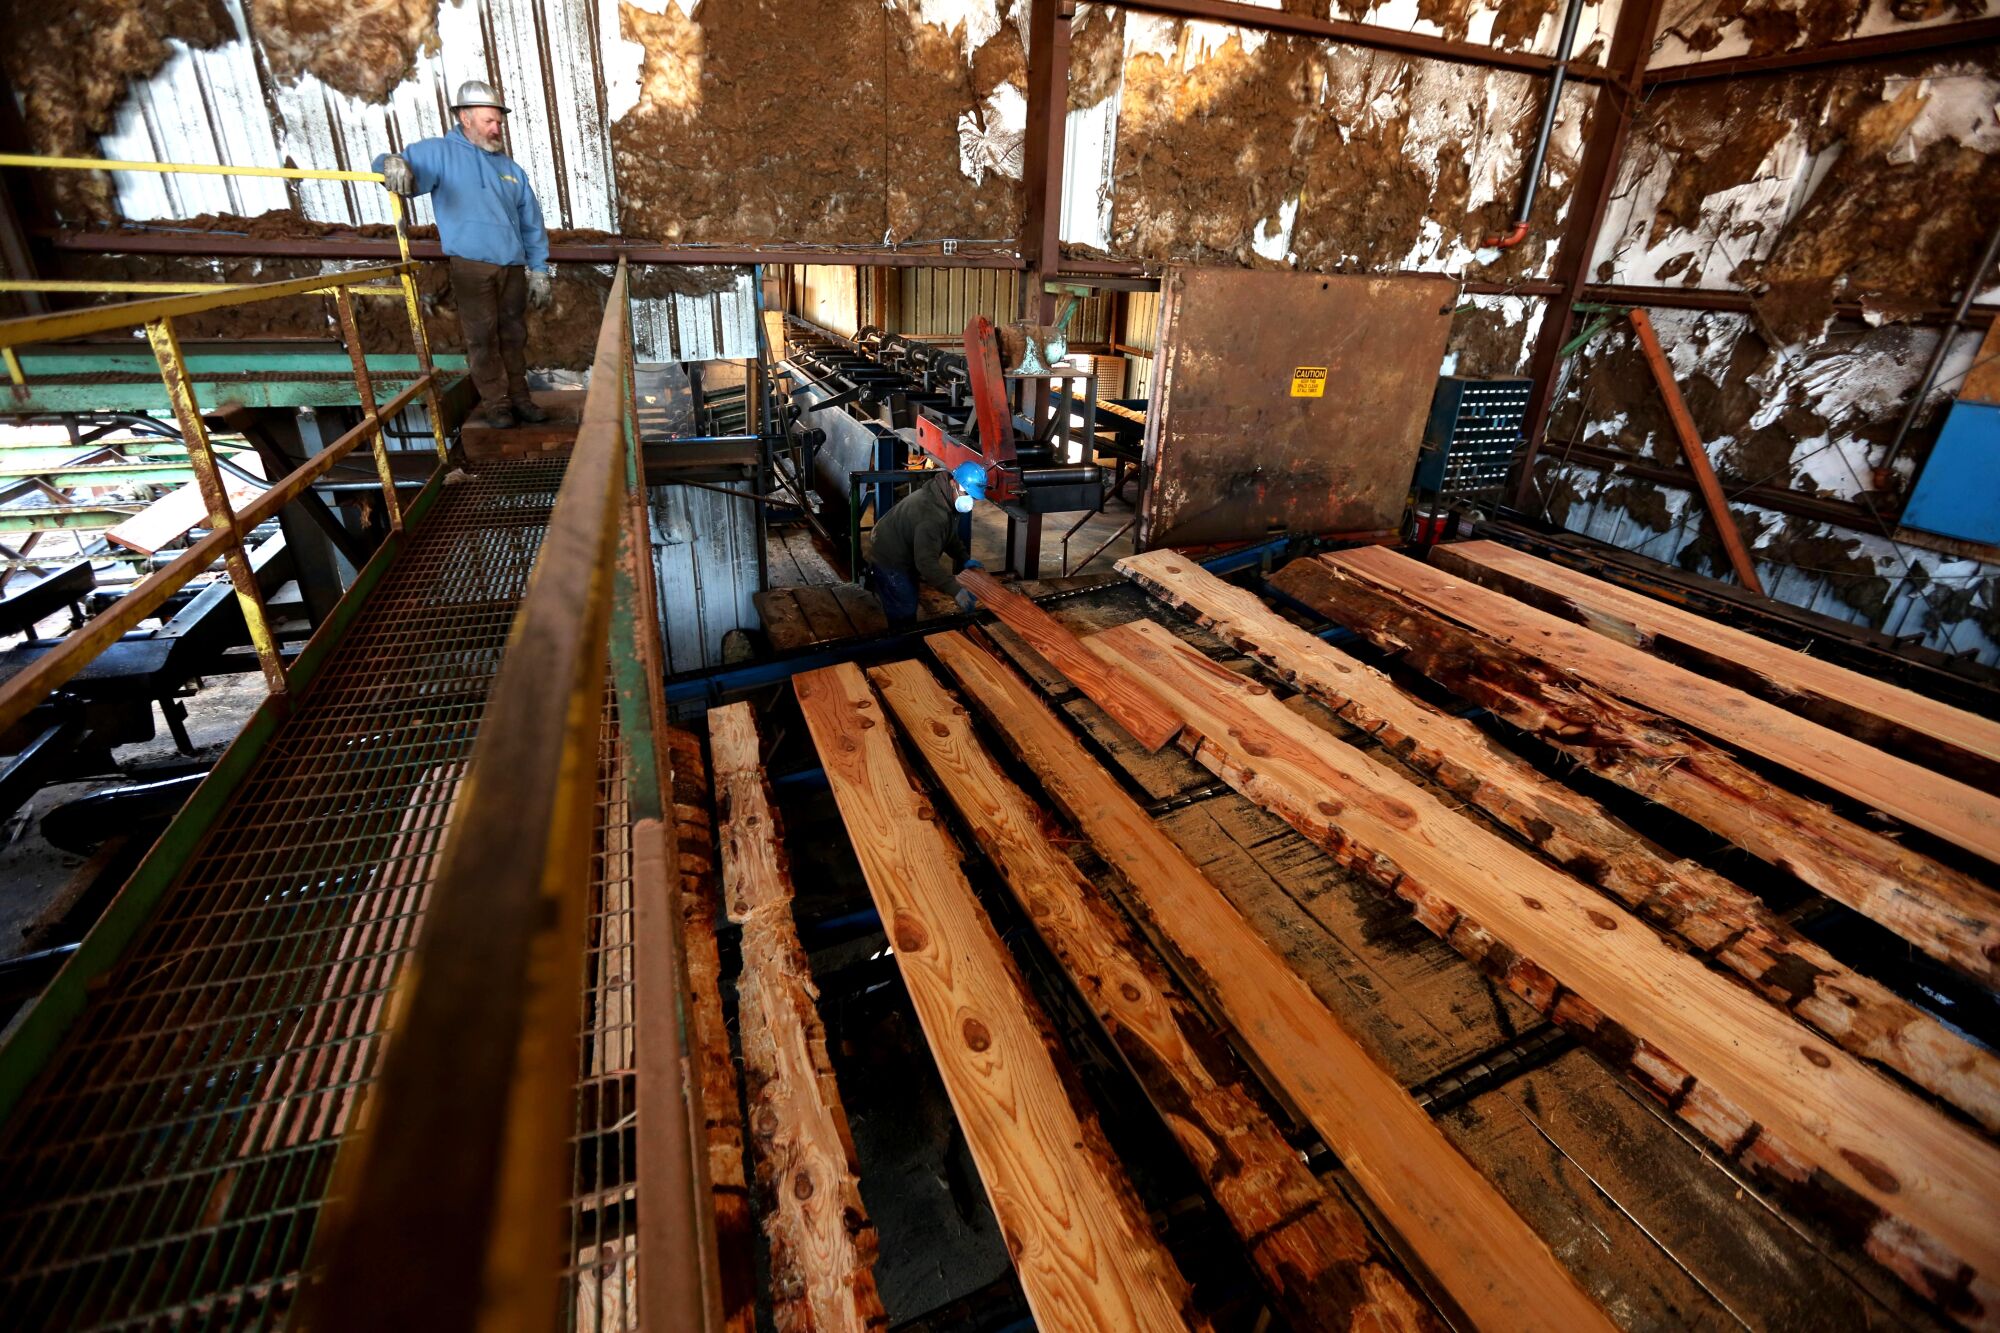 Chris Baldo oversees operations at the Willits Redwood Co. timber mill.